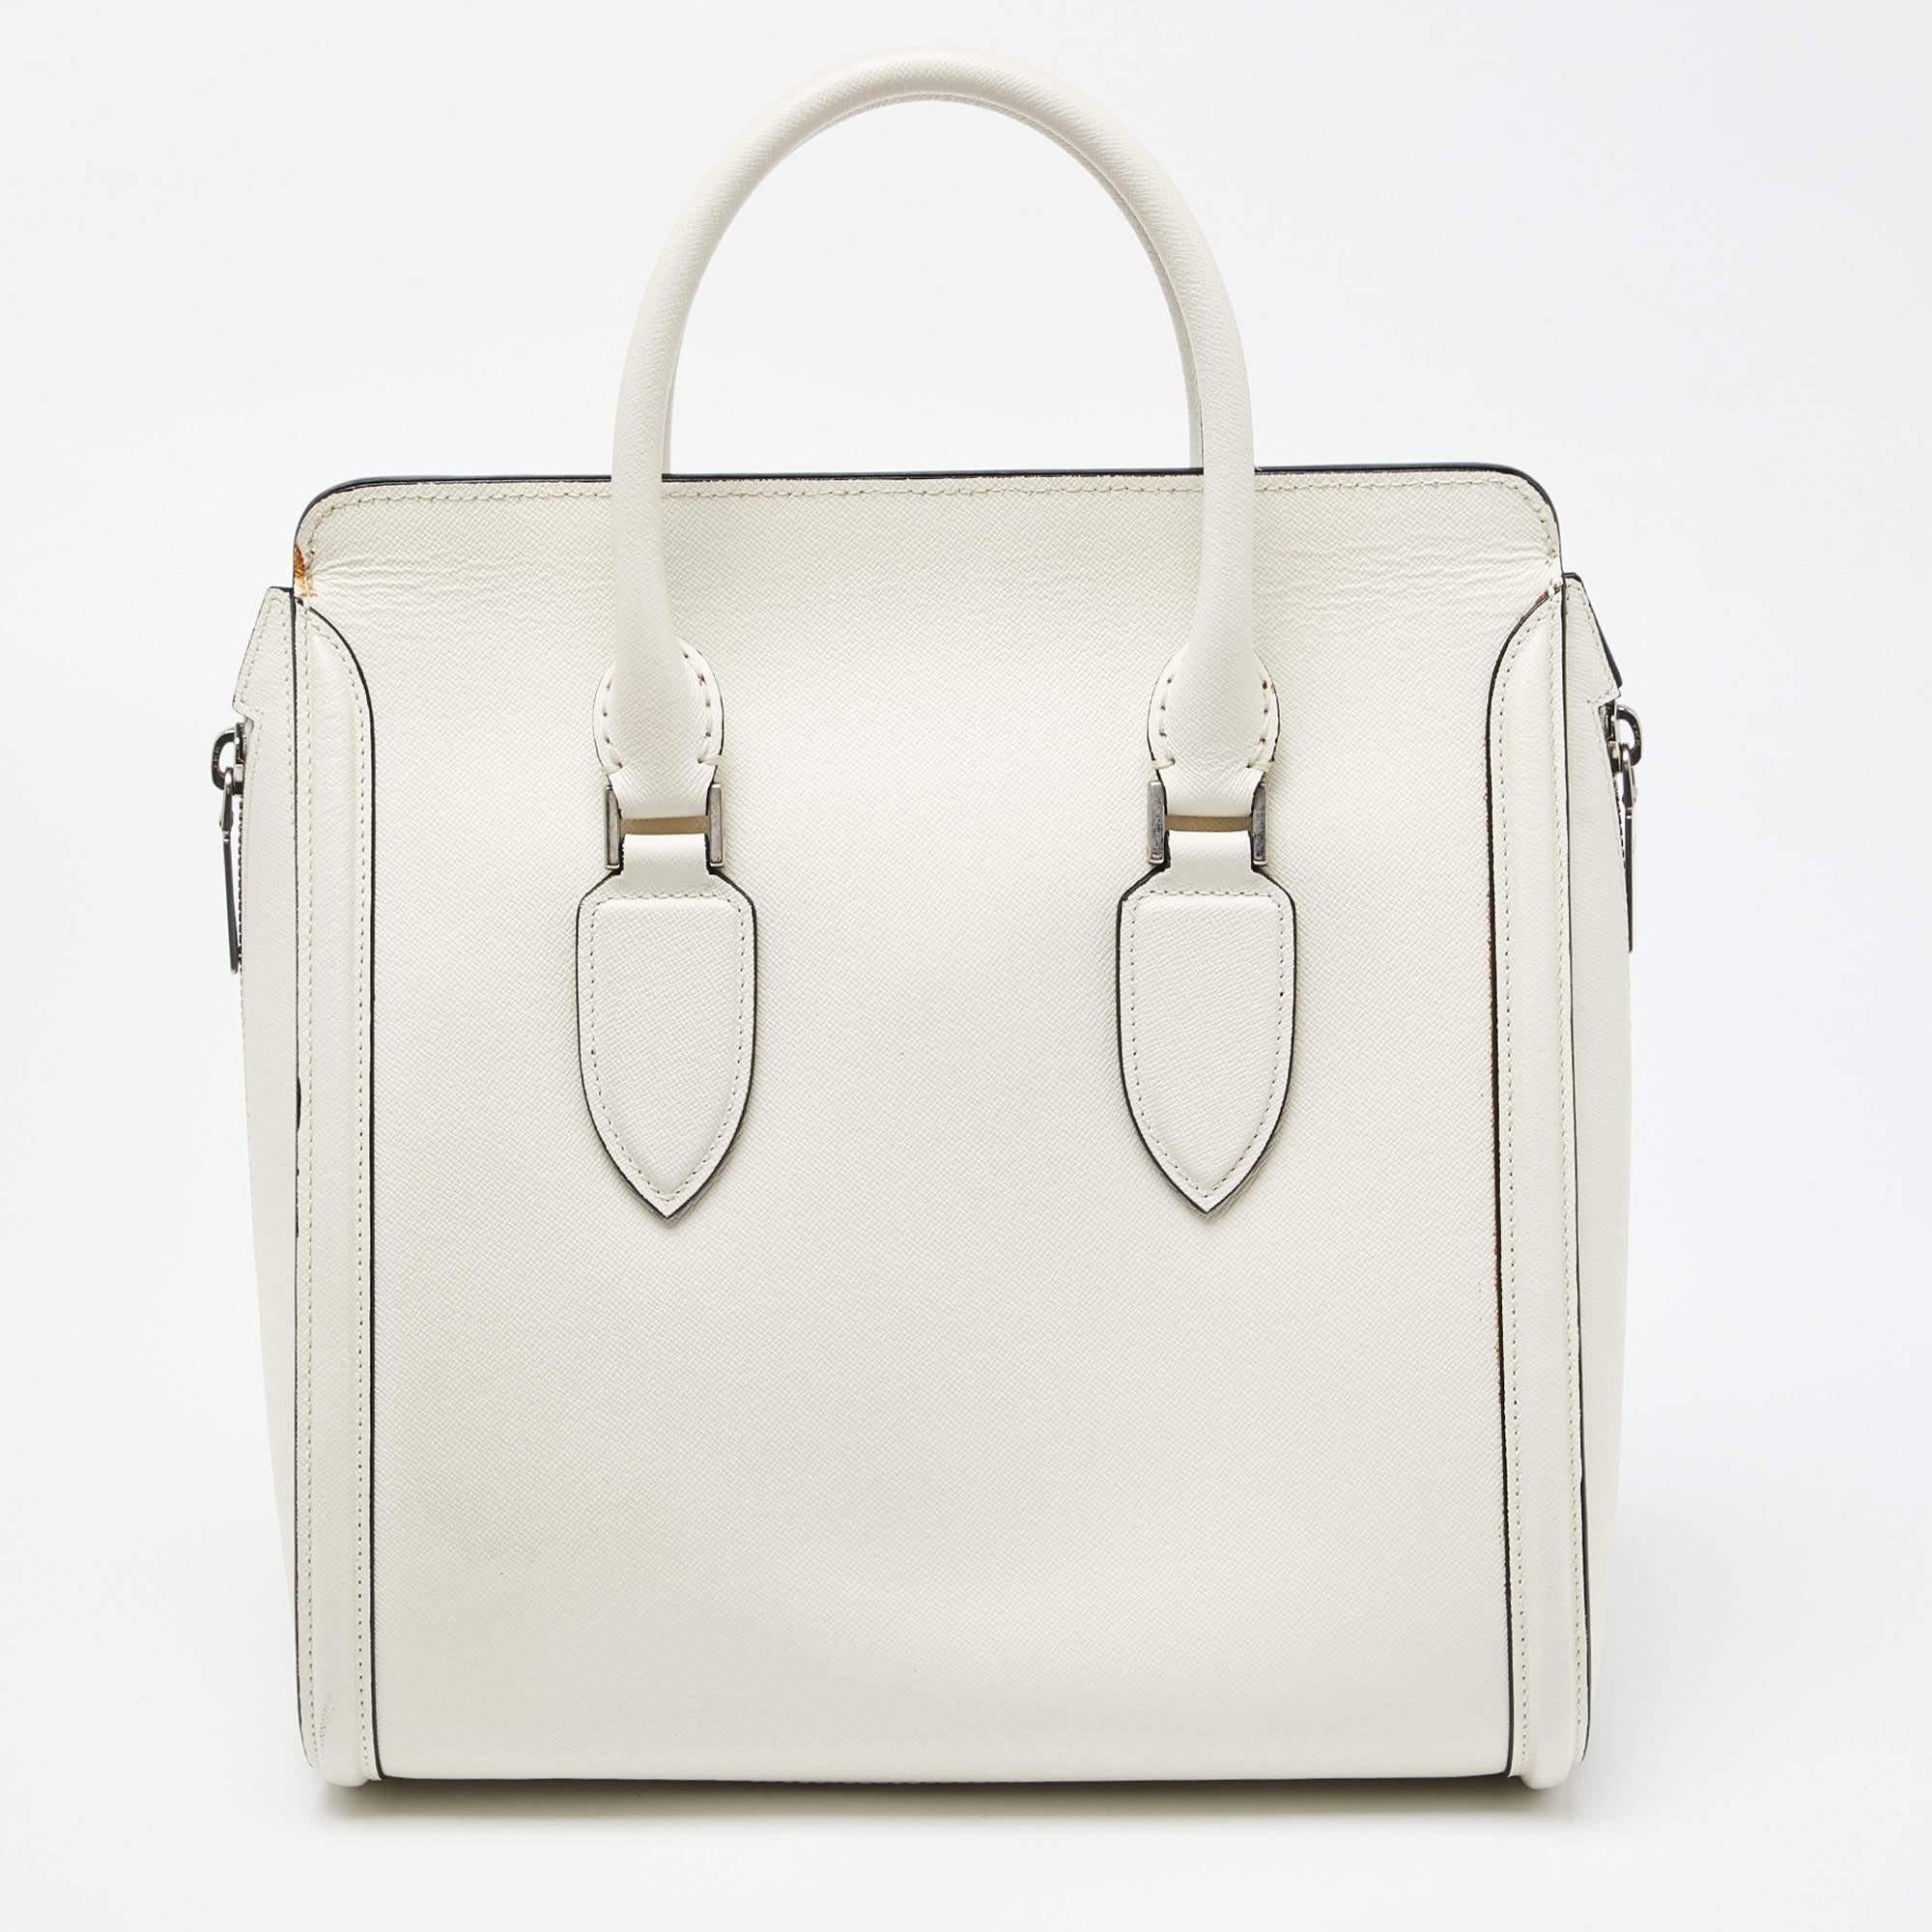 Alexander McQueen Off White Leather Medium Heroine Tote For Sale 1